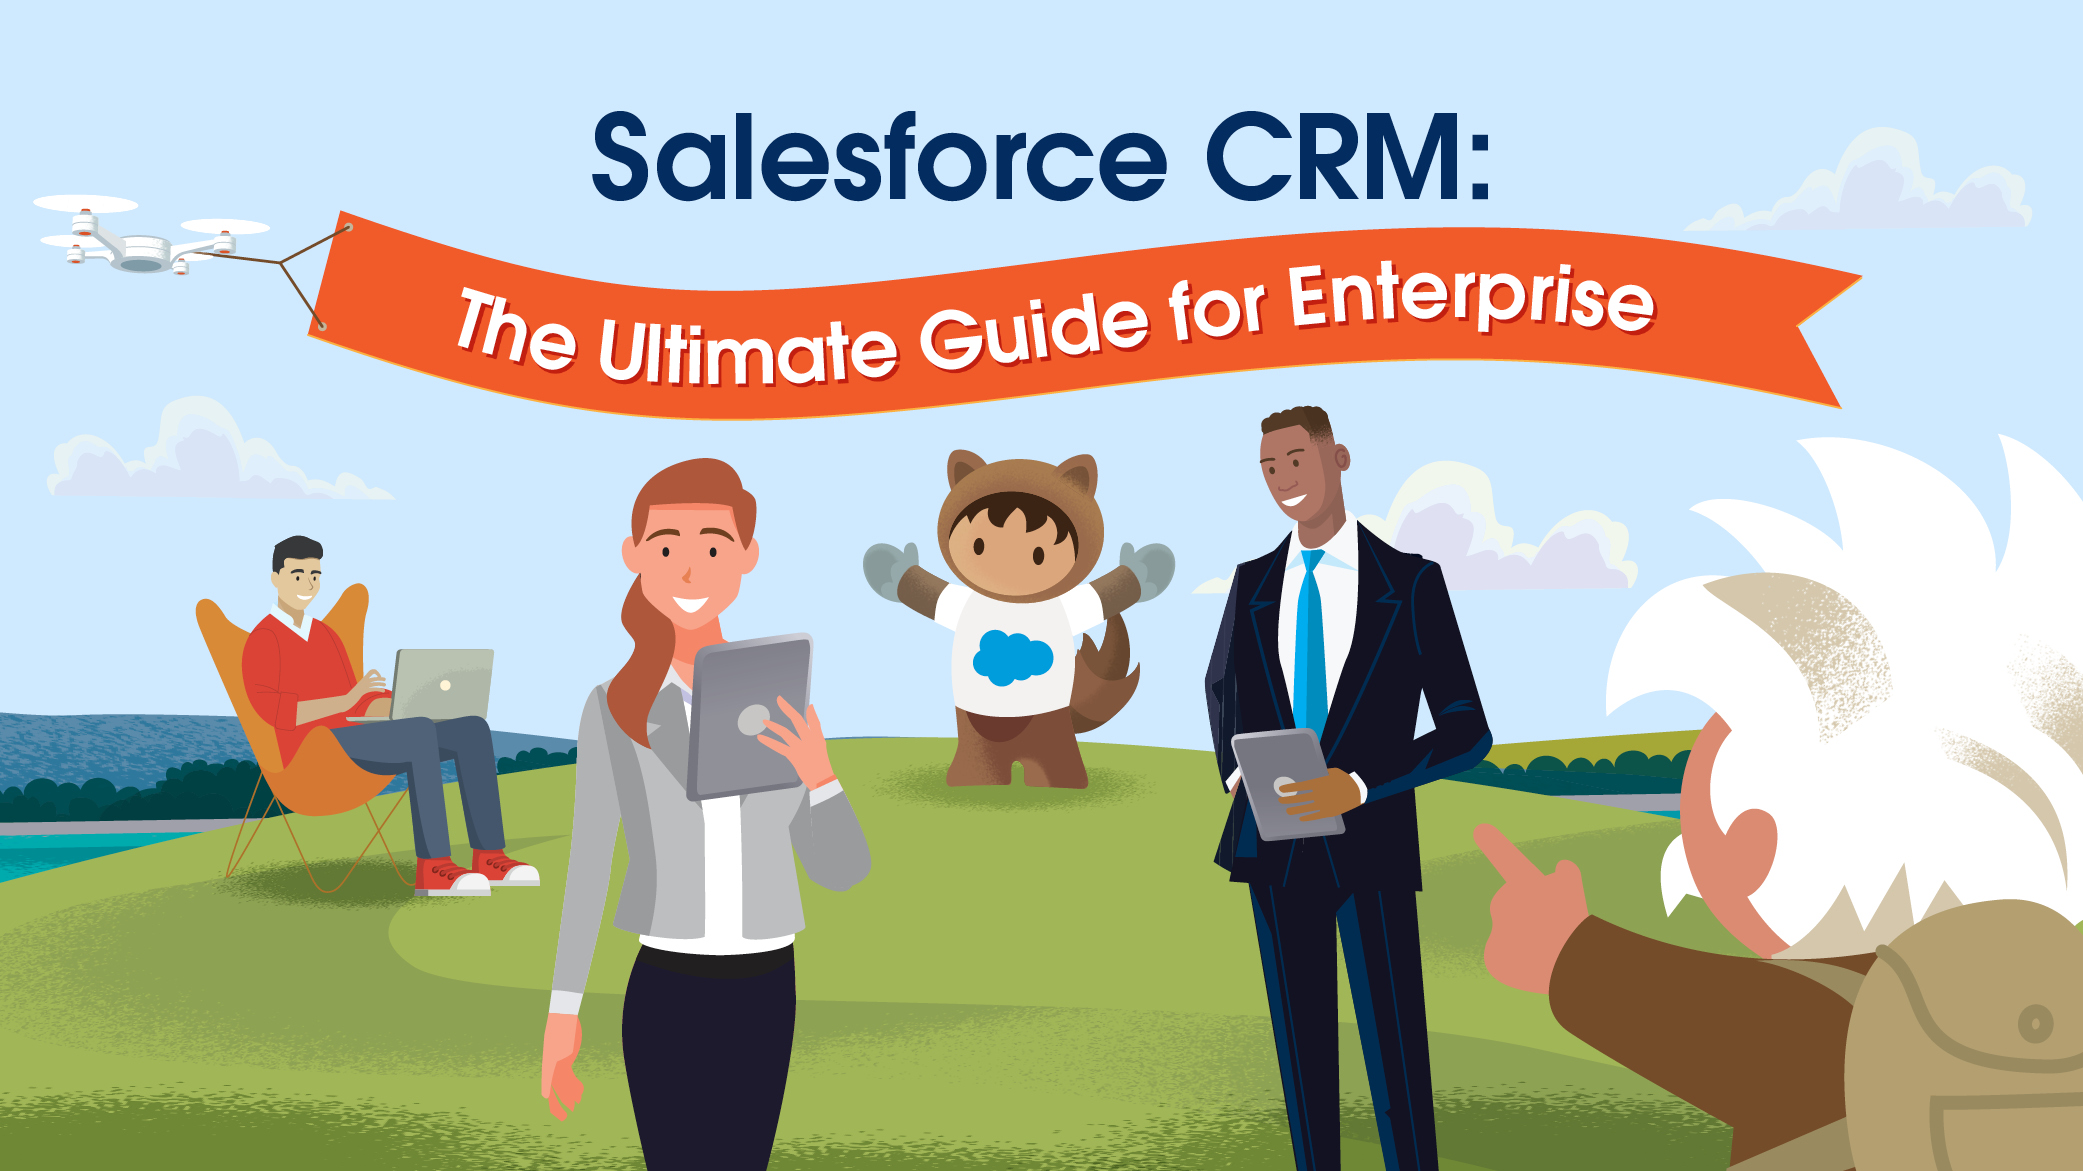 Salesforce CRM: The Ultimate Guide for Enterprise